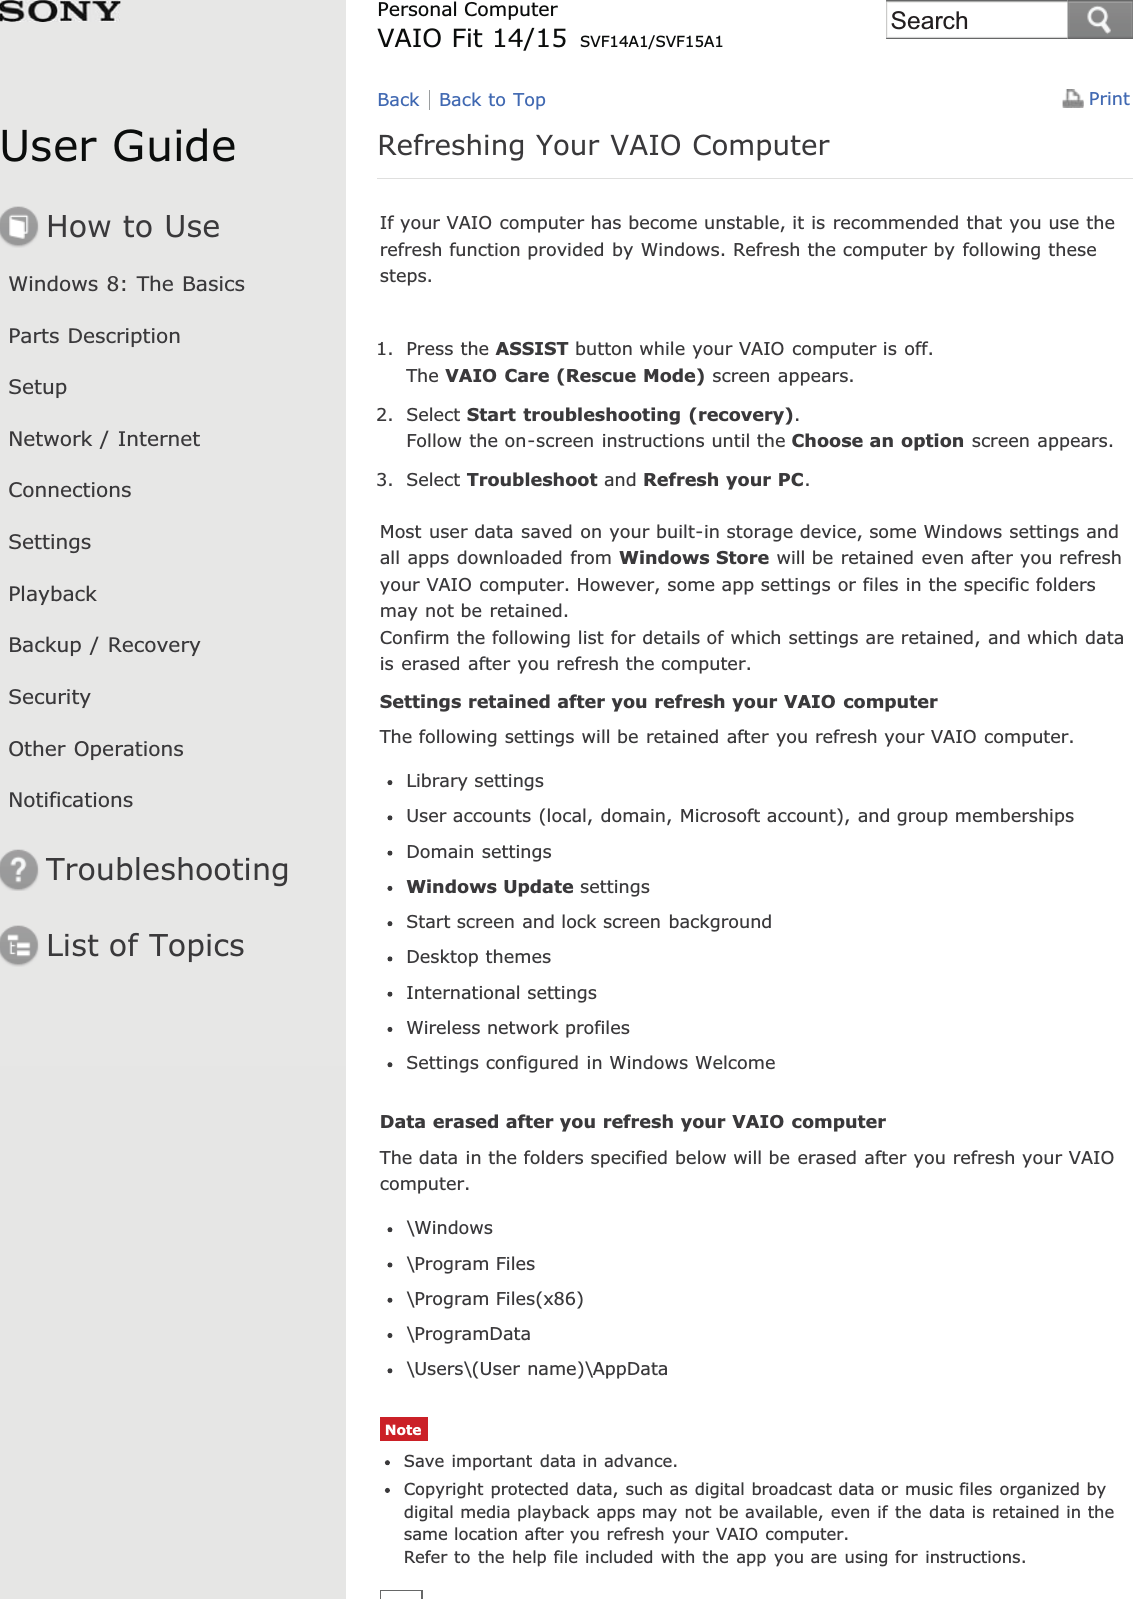 User GuideHow to UseWindows 8: The BasicsParts DescriptionSetupNetwork / InternetConnectionsSettingsPlaybackBackup / RecoverySecurityOther OperationsNotificationsTroubleshootingList of TopicsPrintPersonal ComputerVAIO Fit 14/15 SVF14A1/SVF15A1Refreshing Your VAIO ComputerIf your VAIO computer has become unstable, it is recommended that you use therefresh function provided by Windows. Refresh the computer by following thesesteps.1. Press the ASSIST button while your VAIO computer is off.The VAIO Care (Rescue Mode) screen appears.2. Select Start troubleshooting (recovery).Follow the on-screen instructions until the Choose an option screen appears.3. Select Troubleshoot and Refresh your PC.Most user data saved on your built-in storage device, some Windows settings andall apps downloaded from Windows Store will be retained even after you refreshyour VAIO computer. However, some app settings or files in the specific foldersmay not be retained.Confirm the following list for details of which settings are retained, and which datais erased after you refresh the computer.Settings retained after you refresh your VAIO computerThe following settings will be retained after you refresh your VAIO computer.Library settingsUser accounts (local, domain, Microsoft account), and group membershipsDomain settingsWindows Update settingsStart screen and lock screen backgroundDesktop themesInternational settingsWireless network profilesSettings configured in Windows WelcomeData erased after you refresh your VAIO computerThe data in the folders specified below will be erased after you refresh your VAIOcomputer.\Windows\Program Files\Program Files(x86)\ProgramData\Users\(User name)\AppDataNoteSave important data in advance.Copyright protected data, such as digital broadcast data or music files organized bydigital media playback apps may not be available, even if the data is retained in thesame location after you refresh your VAIO computer.Refer to the help file included with the app you are using for instructions.Back Back to TopSearch